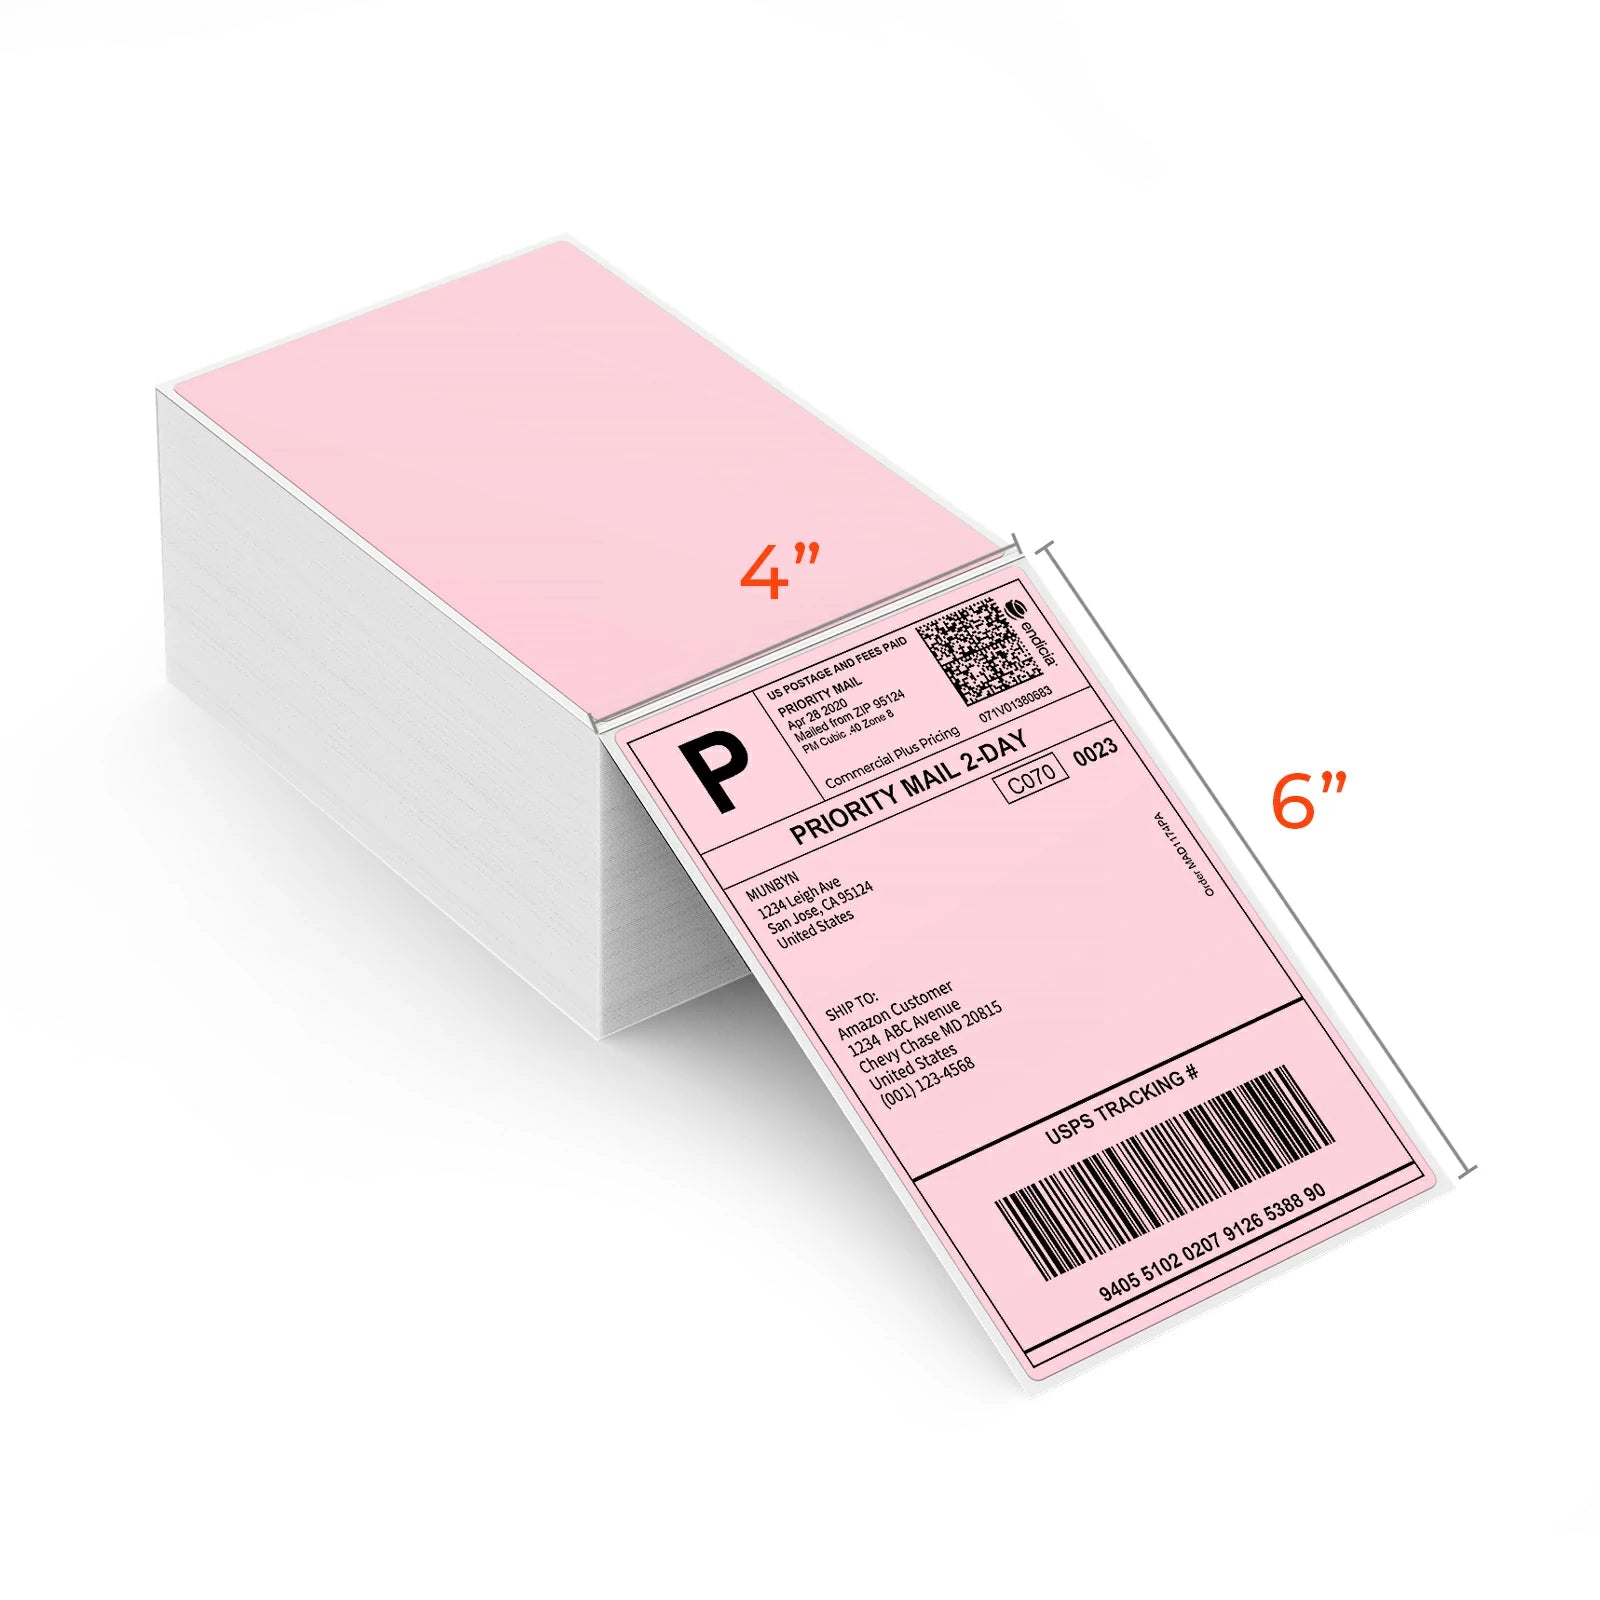 Measuring at 4x6 inches, MUNBYN pink fanfold labels are perfect for printing shipping labels, packing slips, and barcodes.